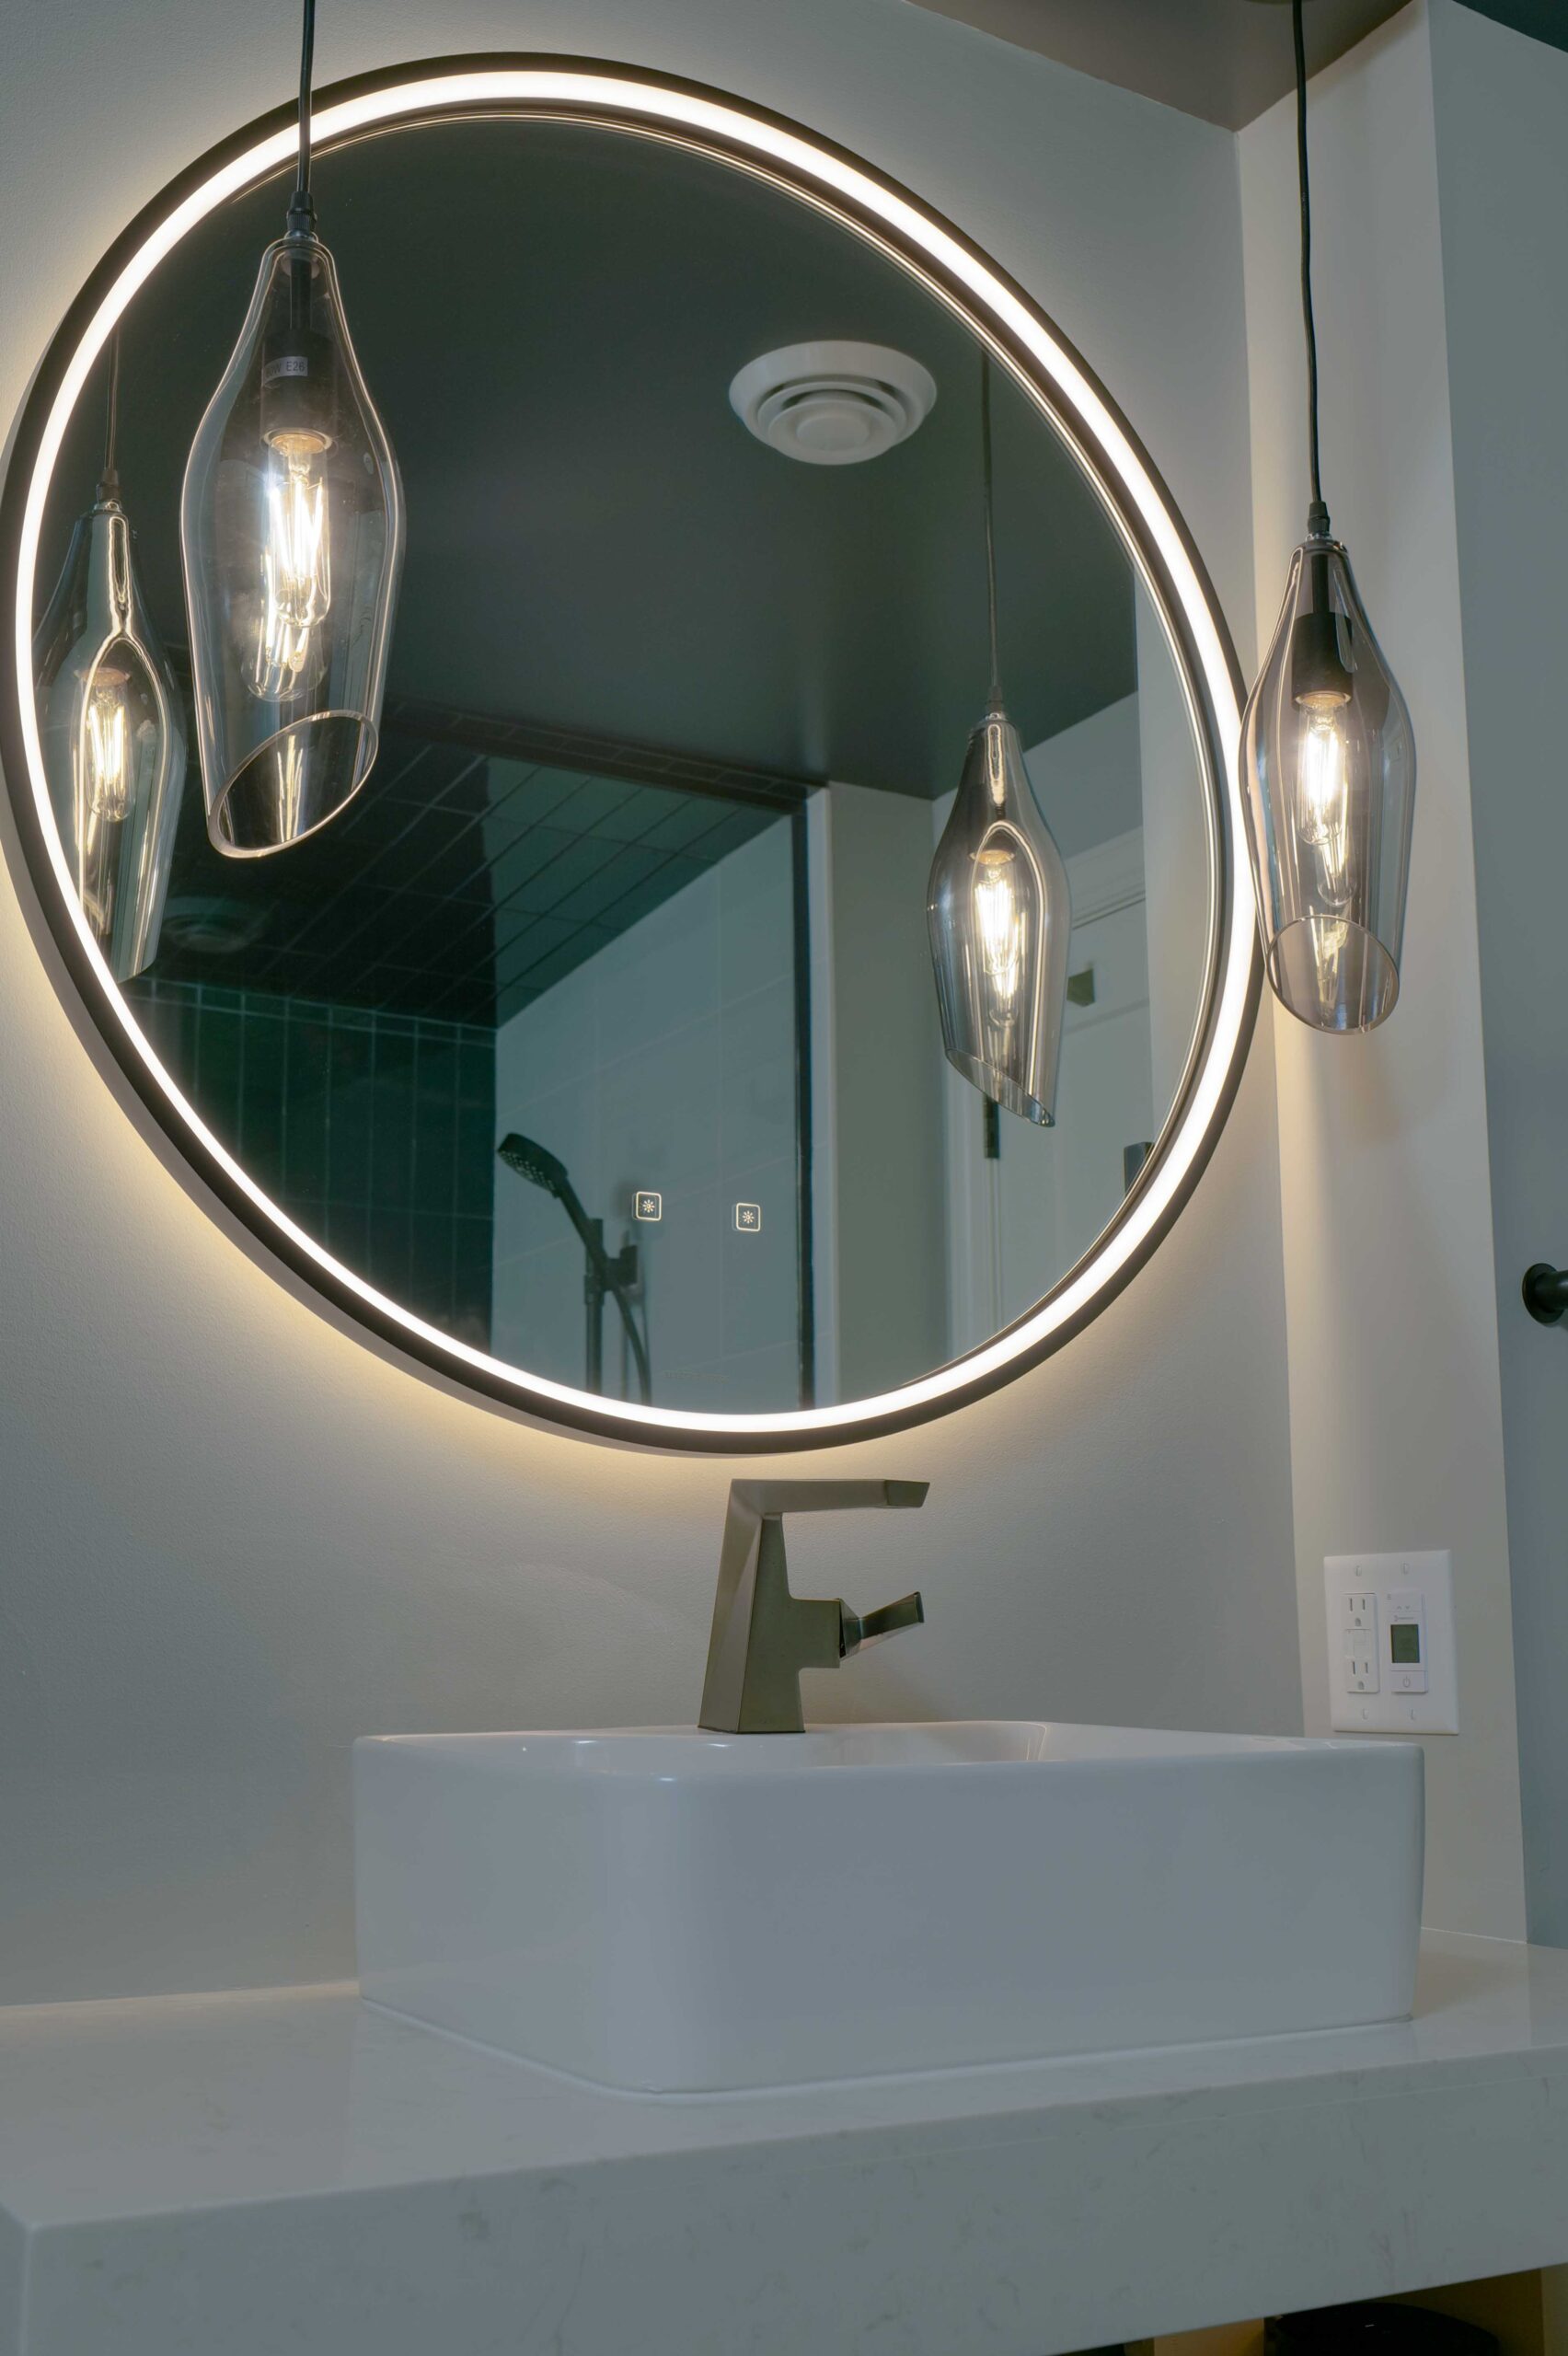 An Orchard Lake remodel with a bathroom featuring a round mirror and lights above it.